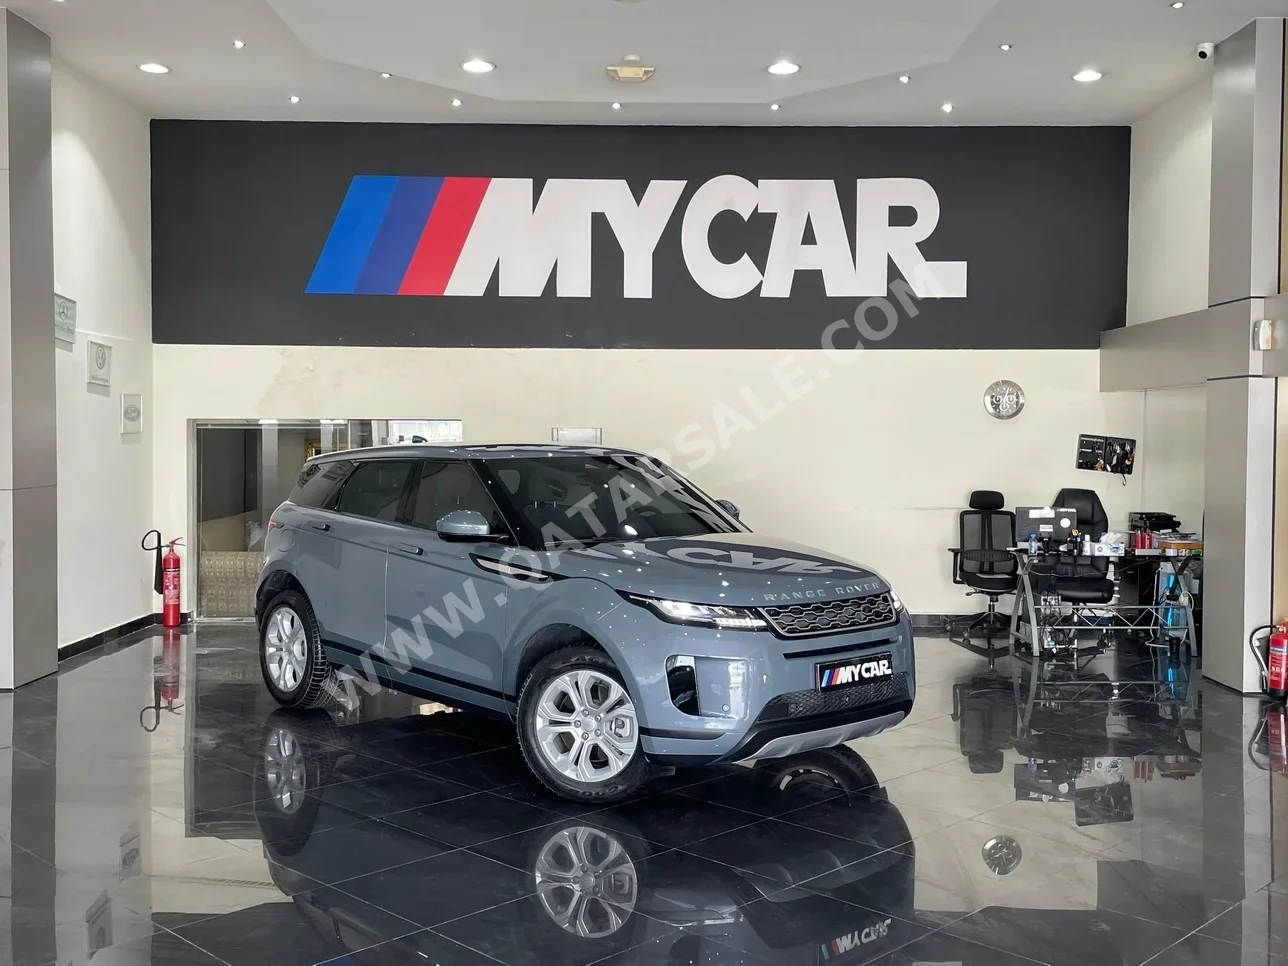 Land Rover  Evoque  2021  Automatic  34,000 Km  4 Cylinder  Four Wheel Drive (4WD)  SUV  Gray  With Warranty